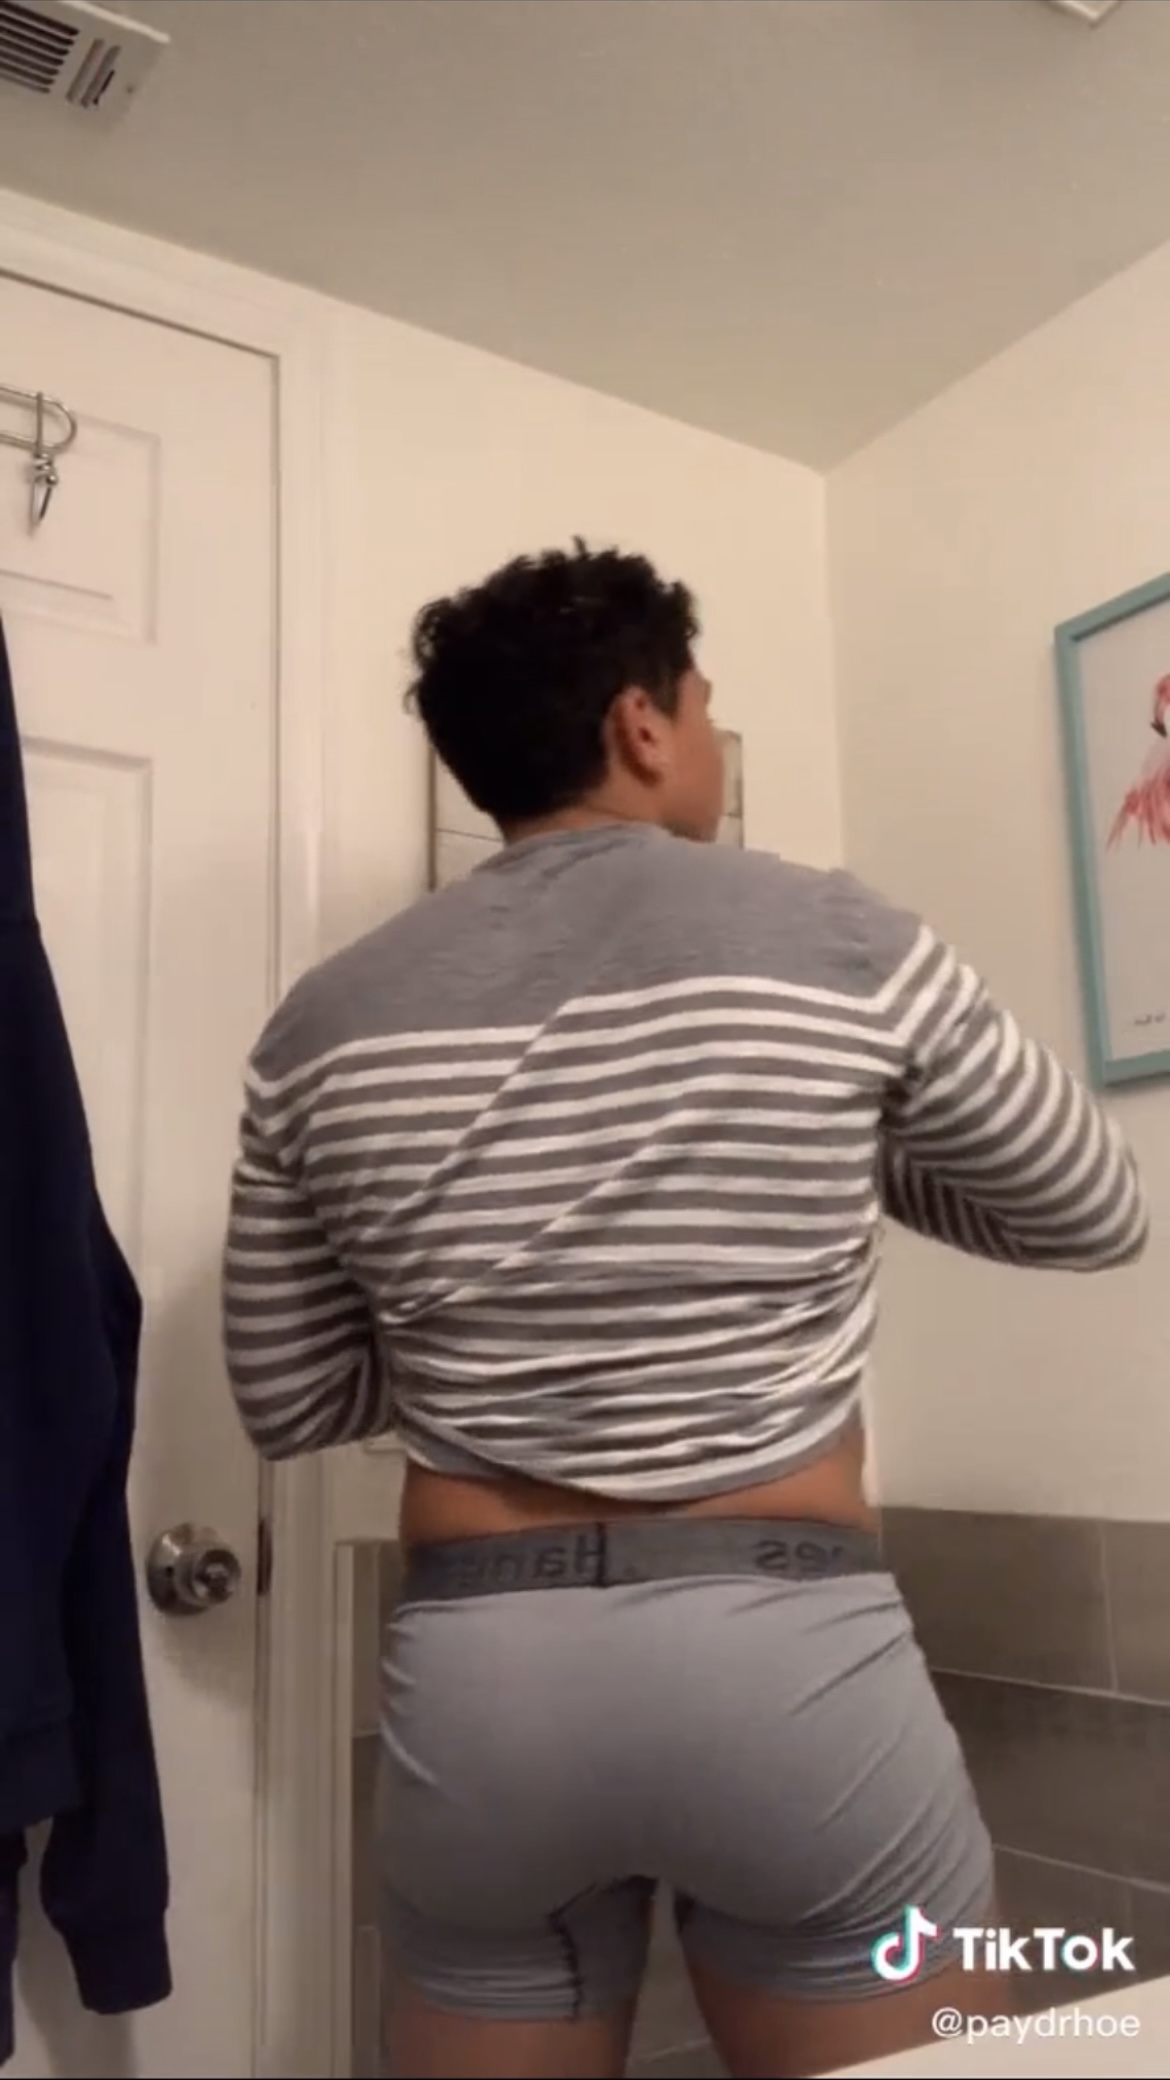 Another perfect str8 dude showing off his big fat booty